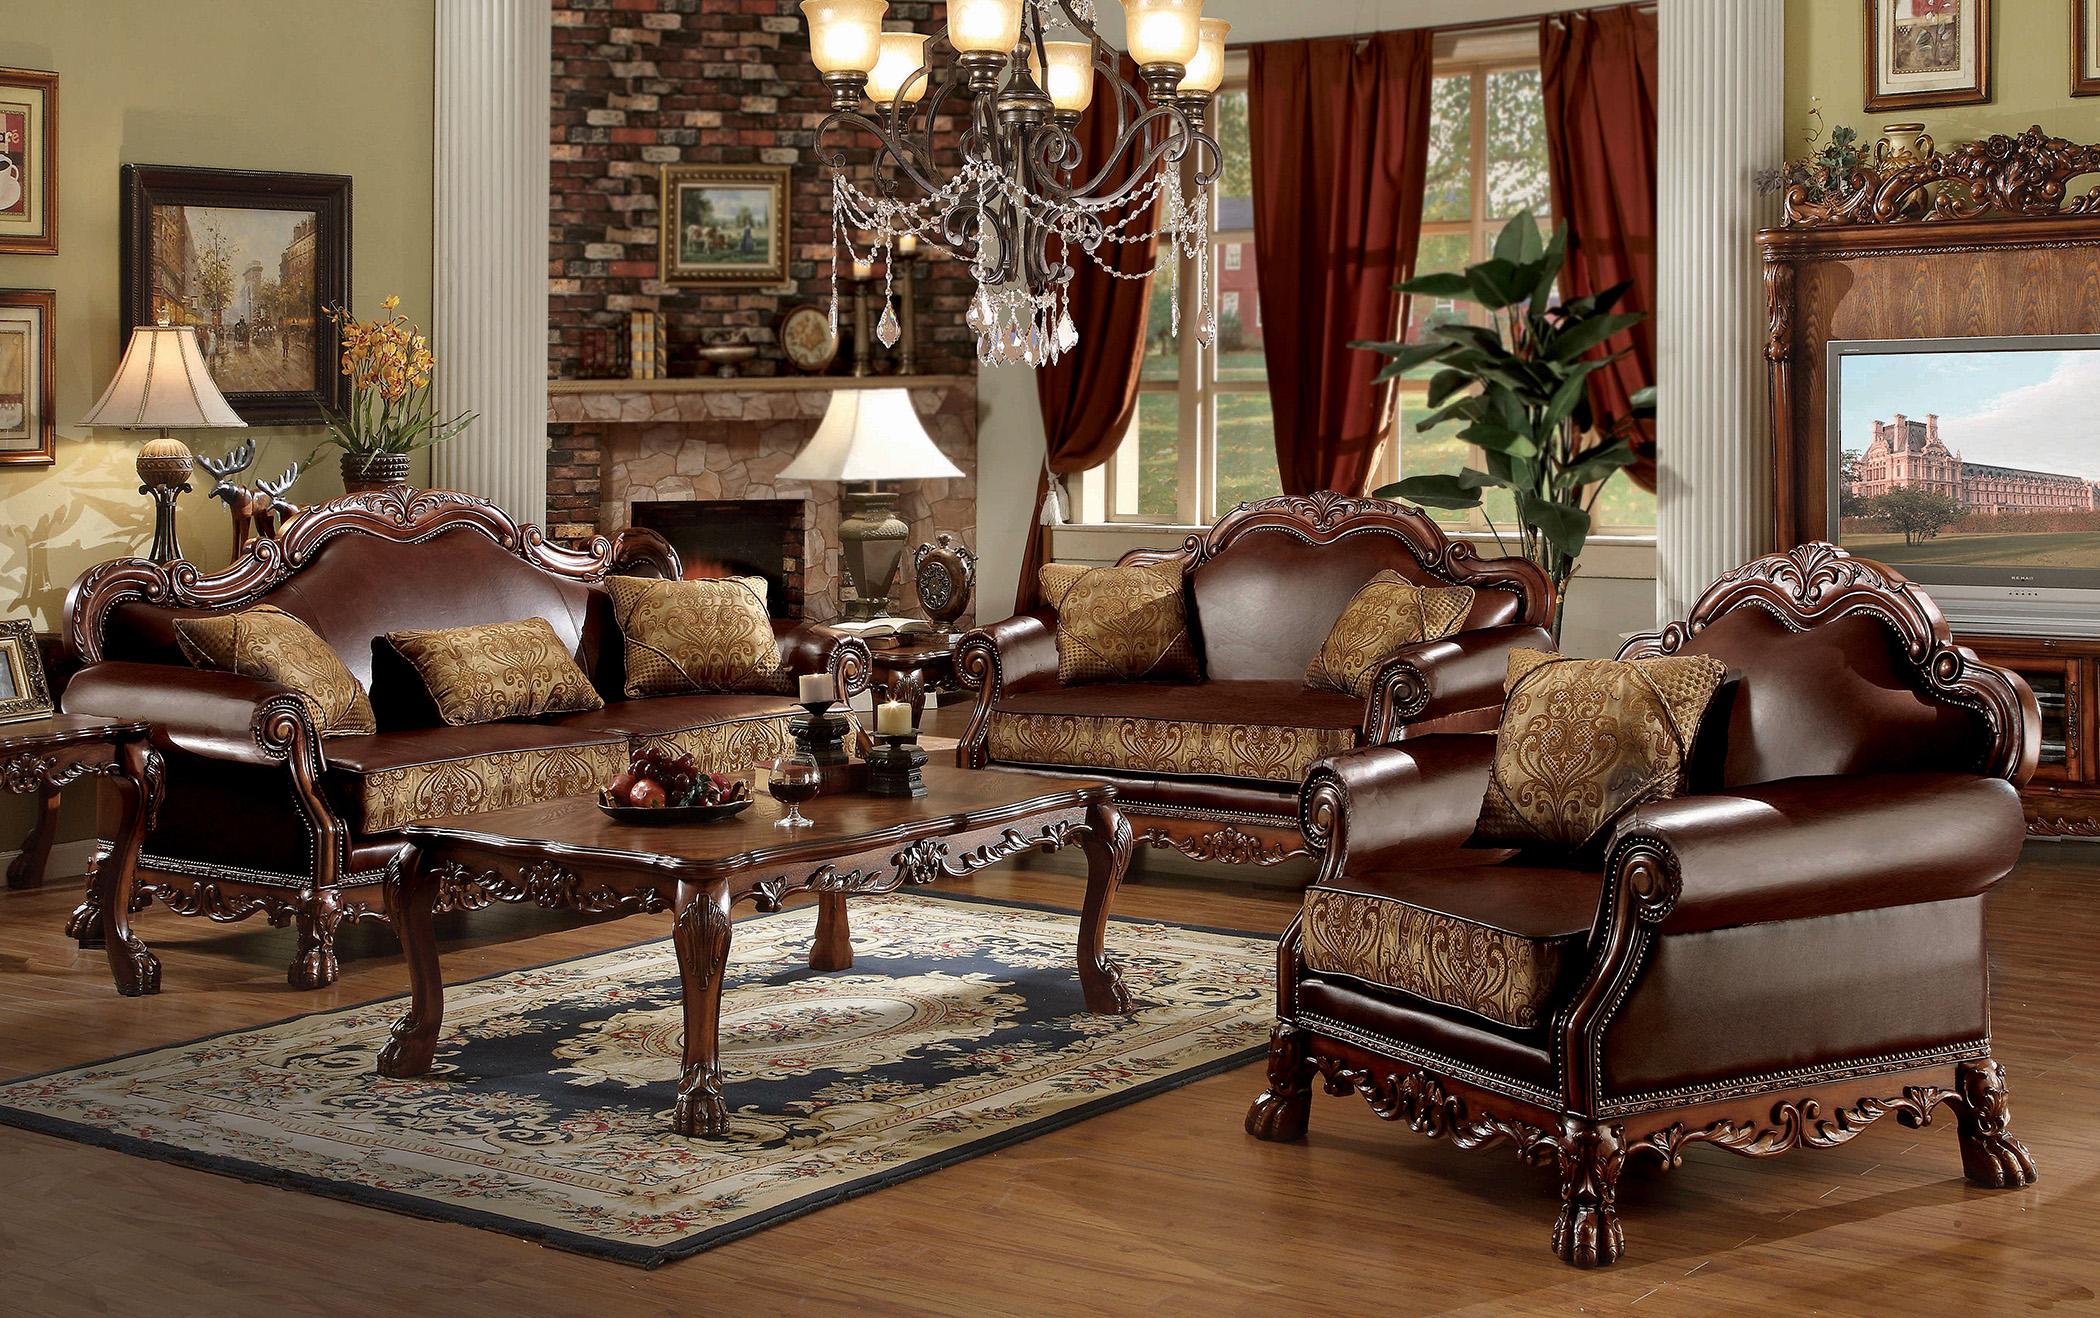 Traditional,  Vintage Sofa Loveseat Chair Dresden-15160 Dresden-15160-Set-3 in Oak, Cherry, Brown Faux Leather